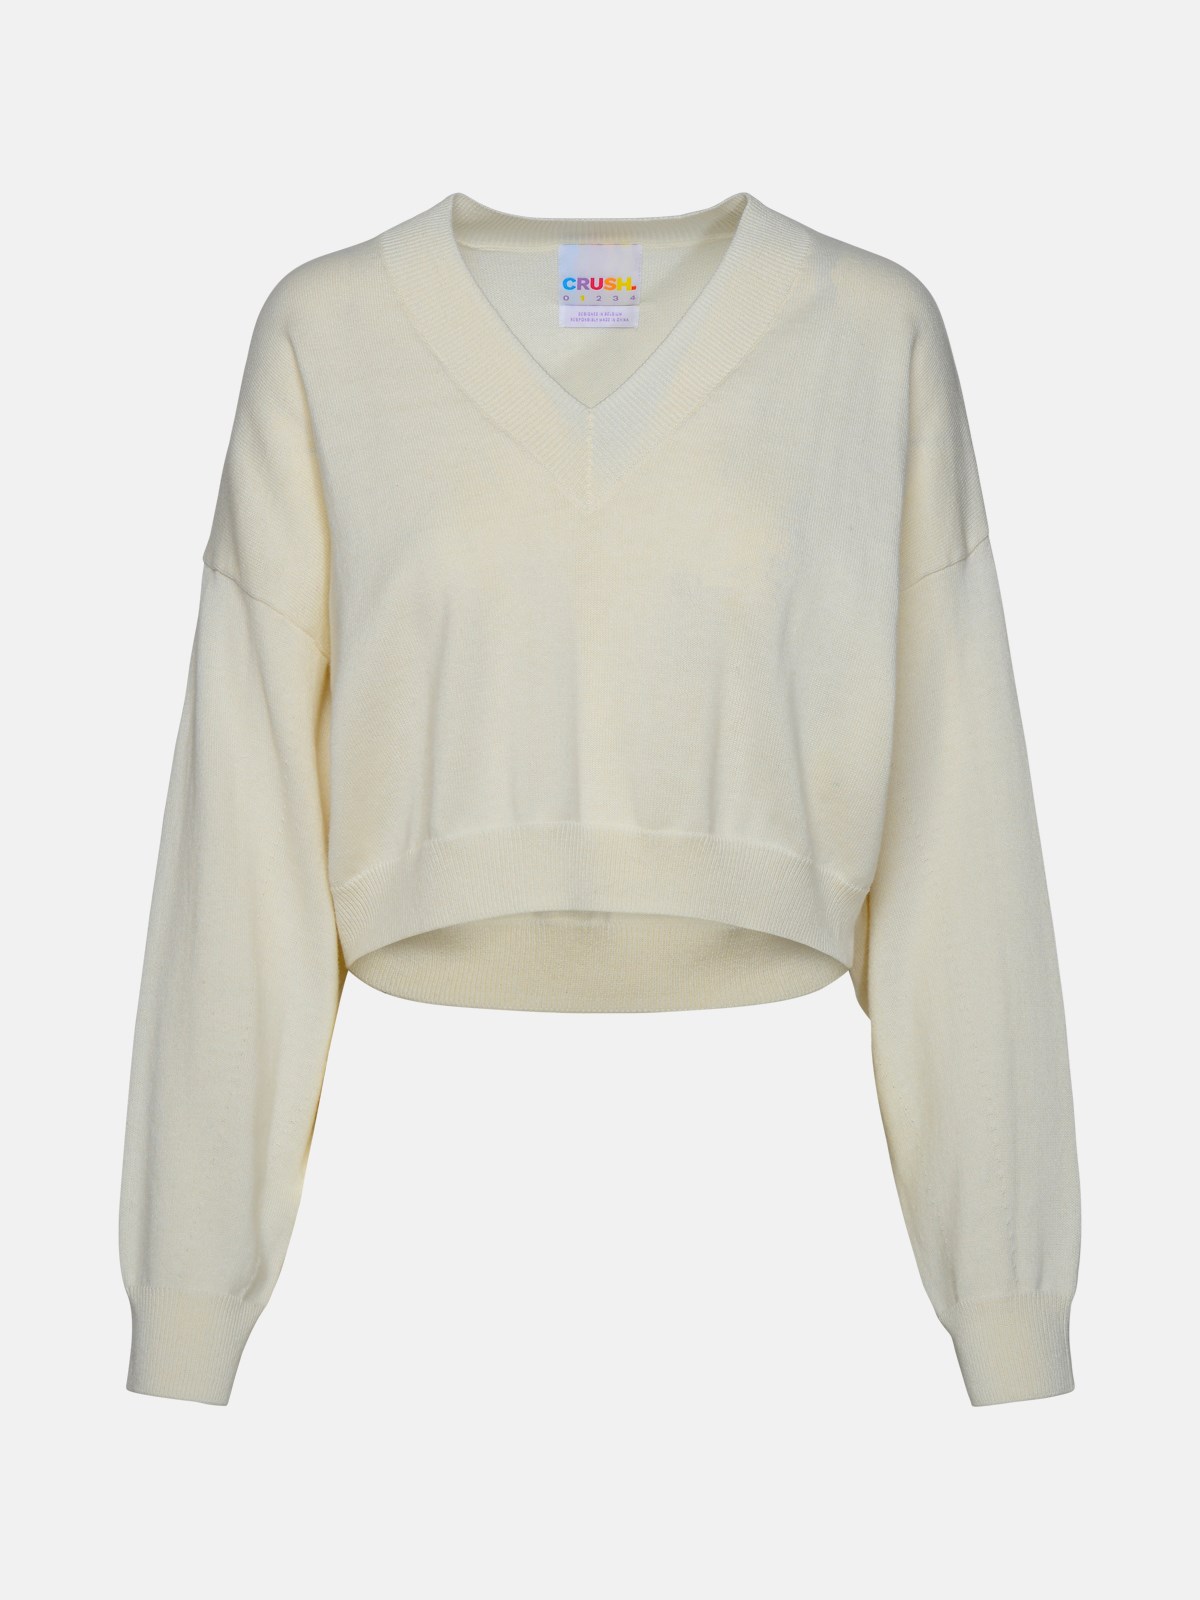 CRUSH IVORY CASHMERE BLEND SWEATER